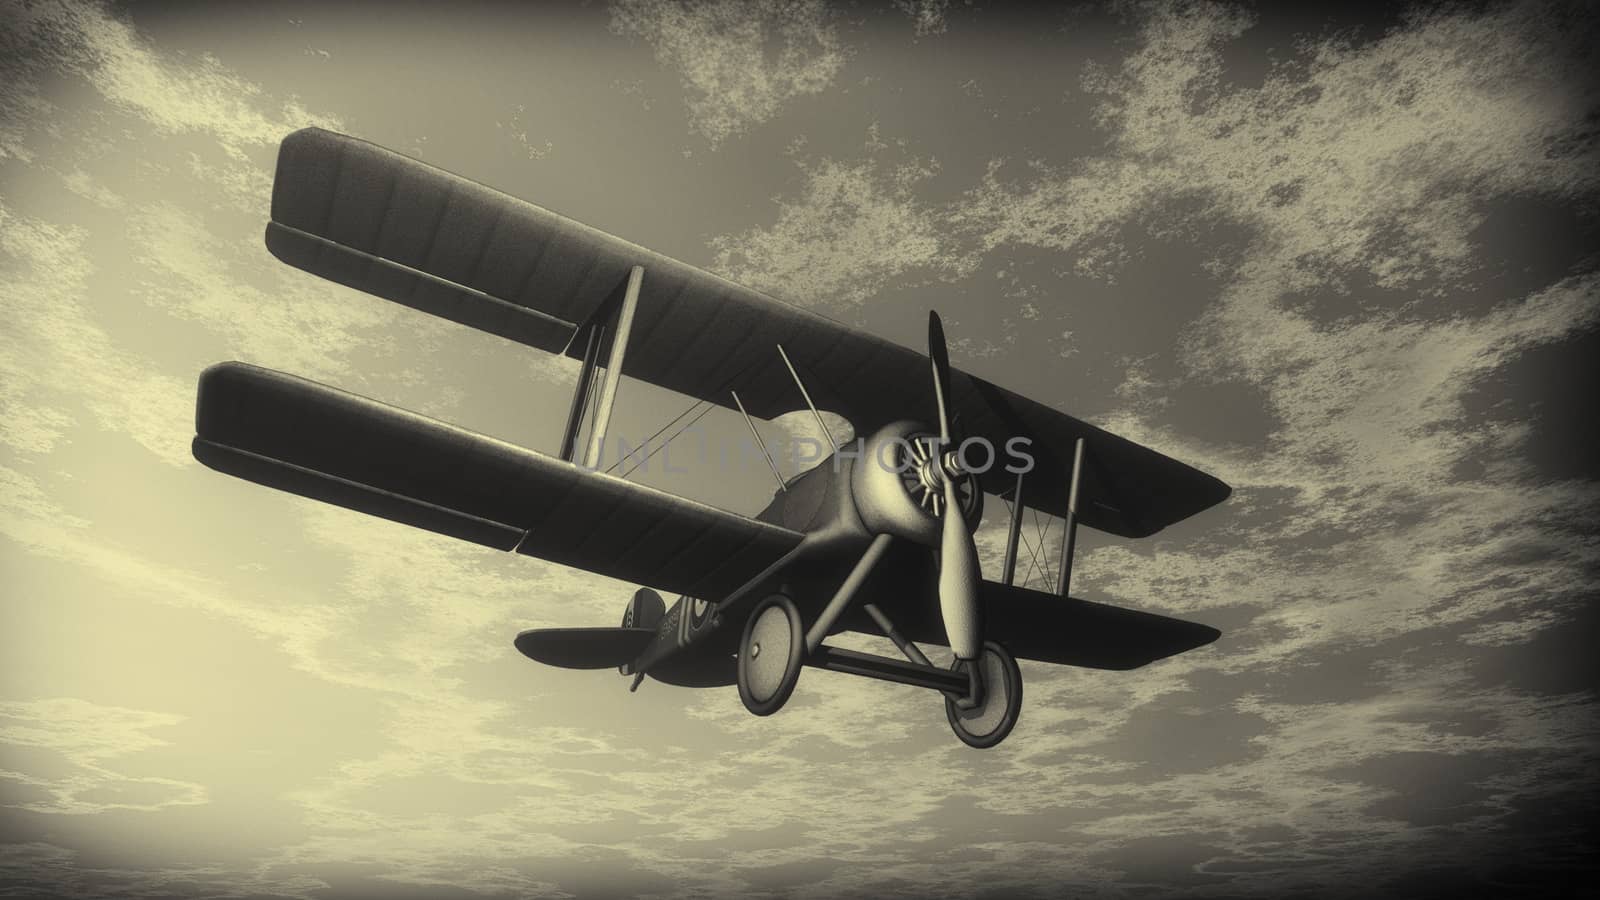 Biplane flying in the sky, vintage style - 3D render by Elenaphotos21